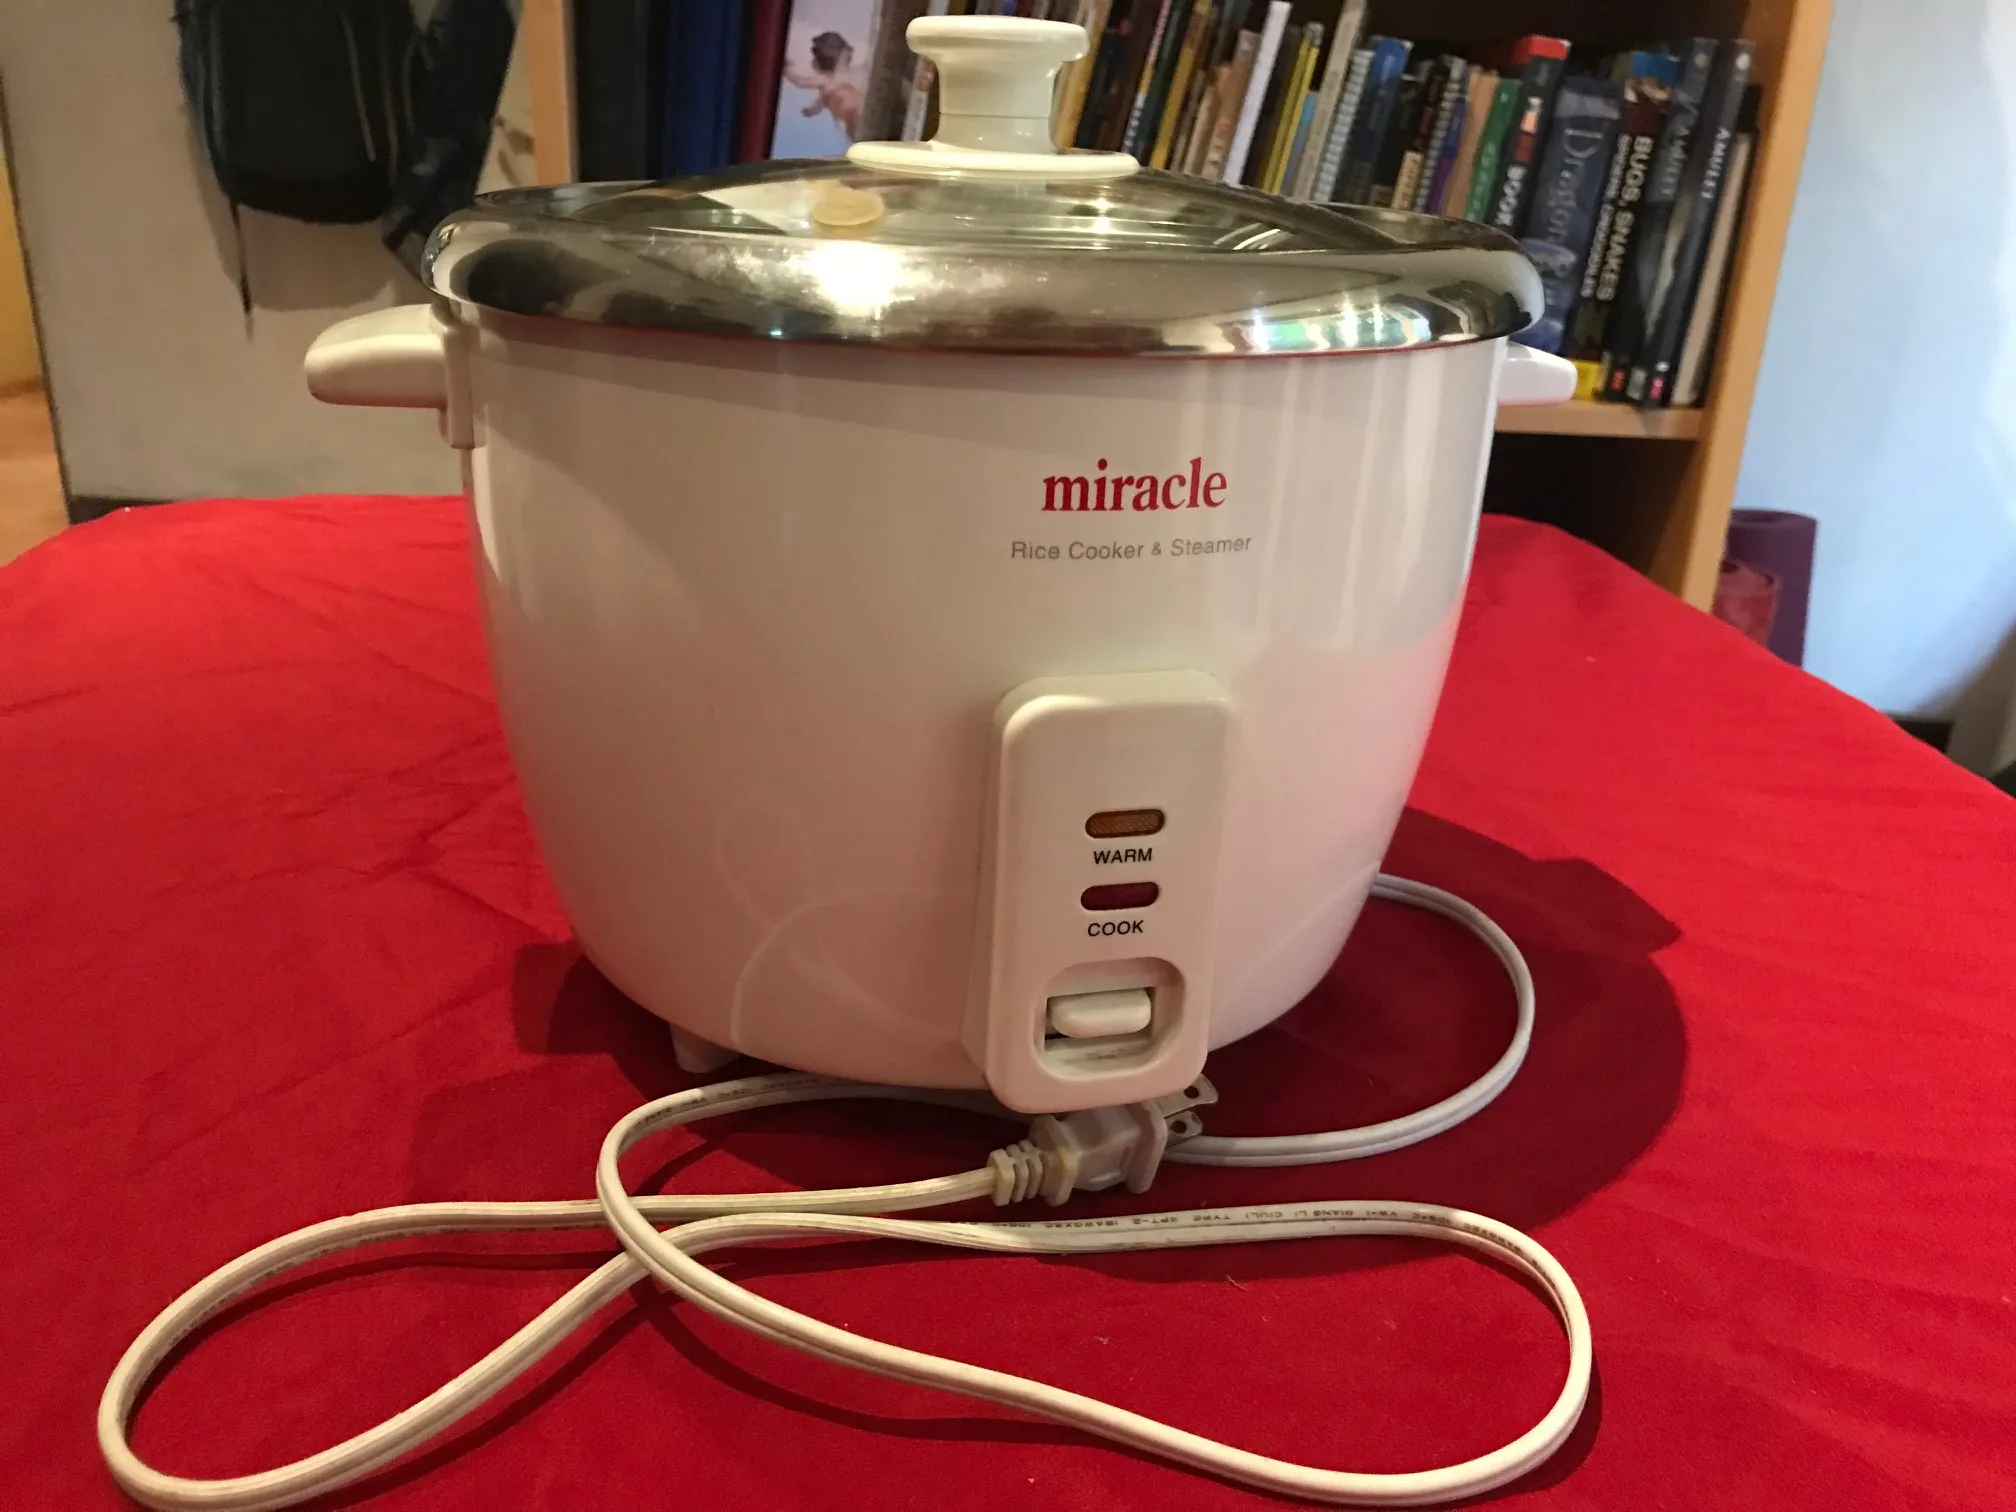 https://storables.com/wp-content/uploads/2023/08/14-amazing-miracle-rice-cooker-for-2023-1691993917.jpg